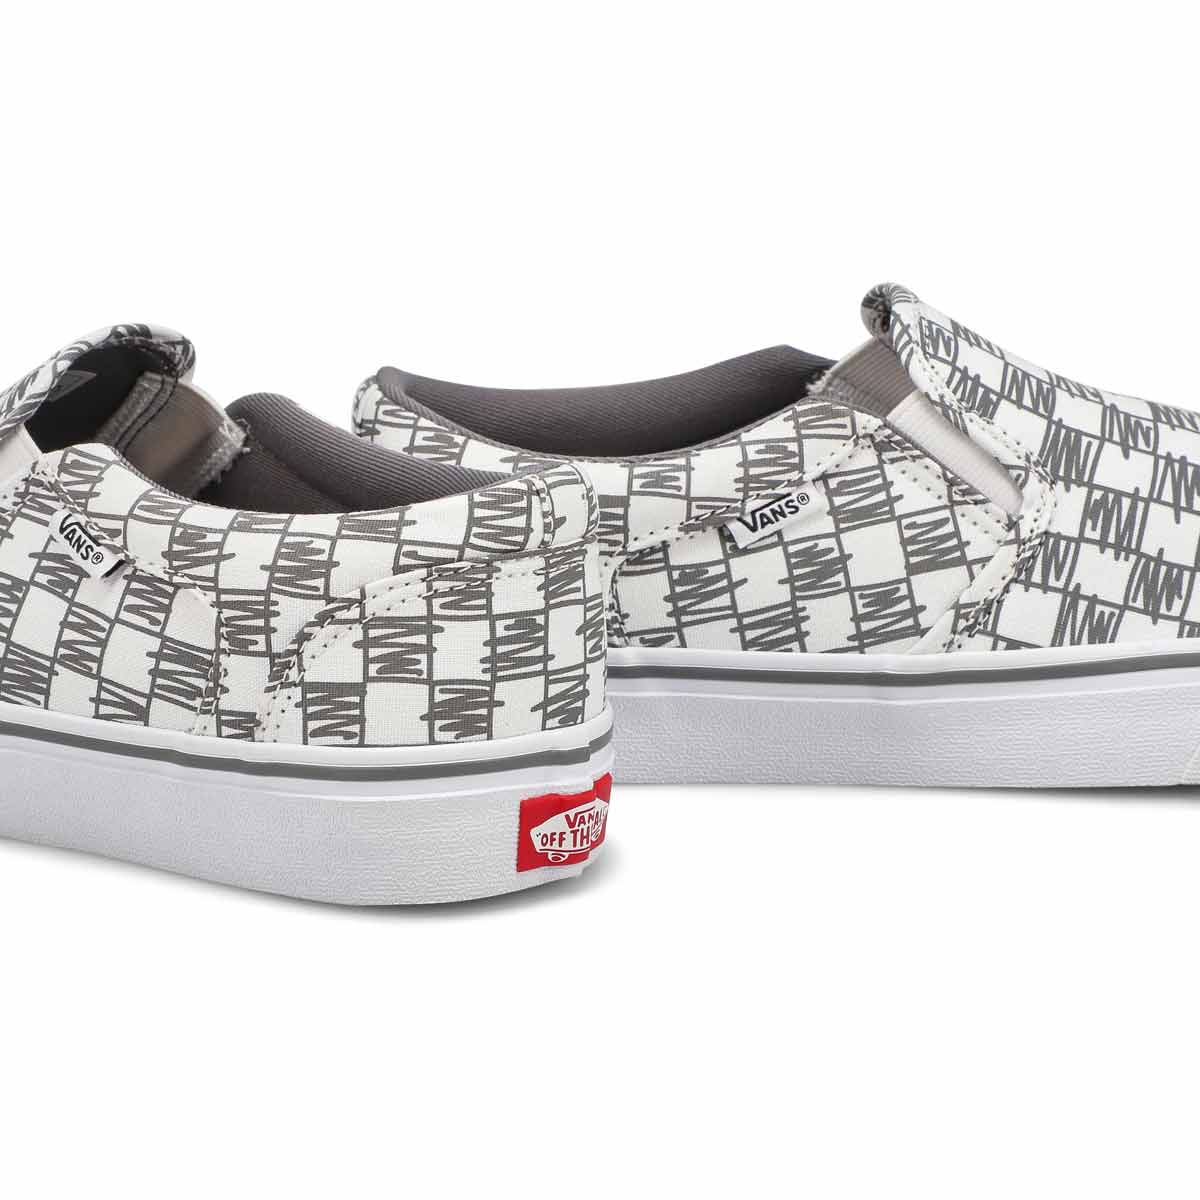 Men's Asher Sneaker - Checkered Sketched